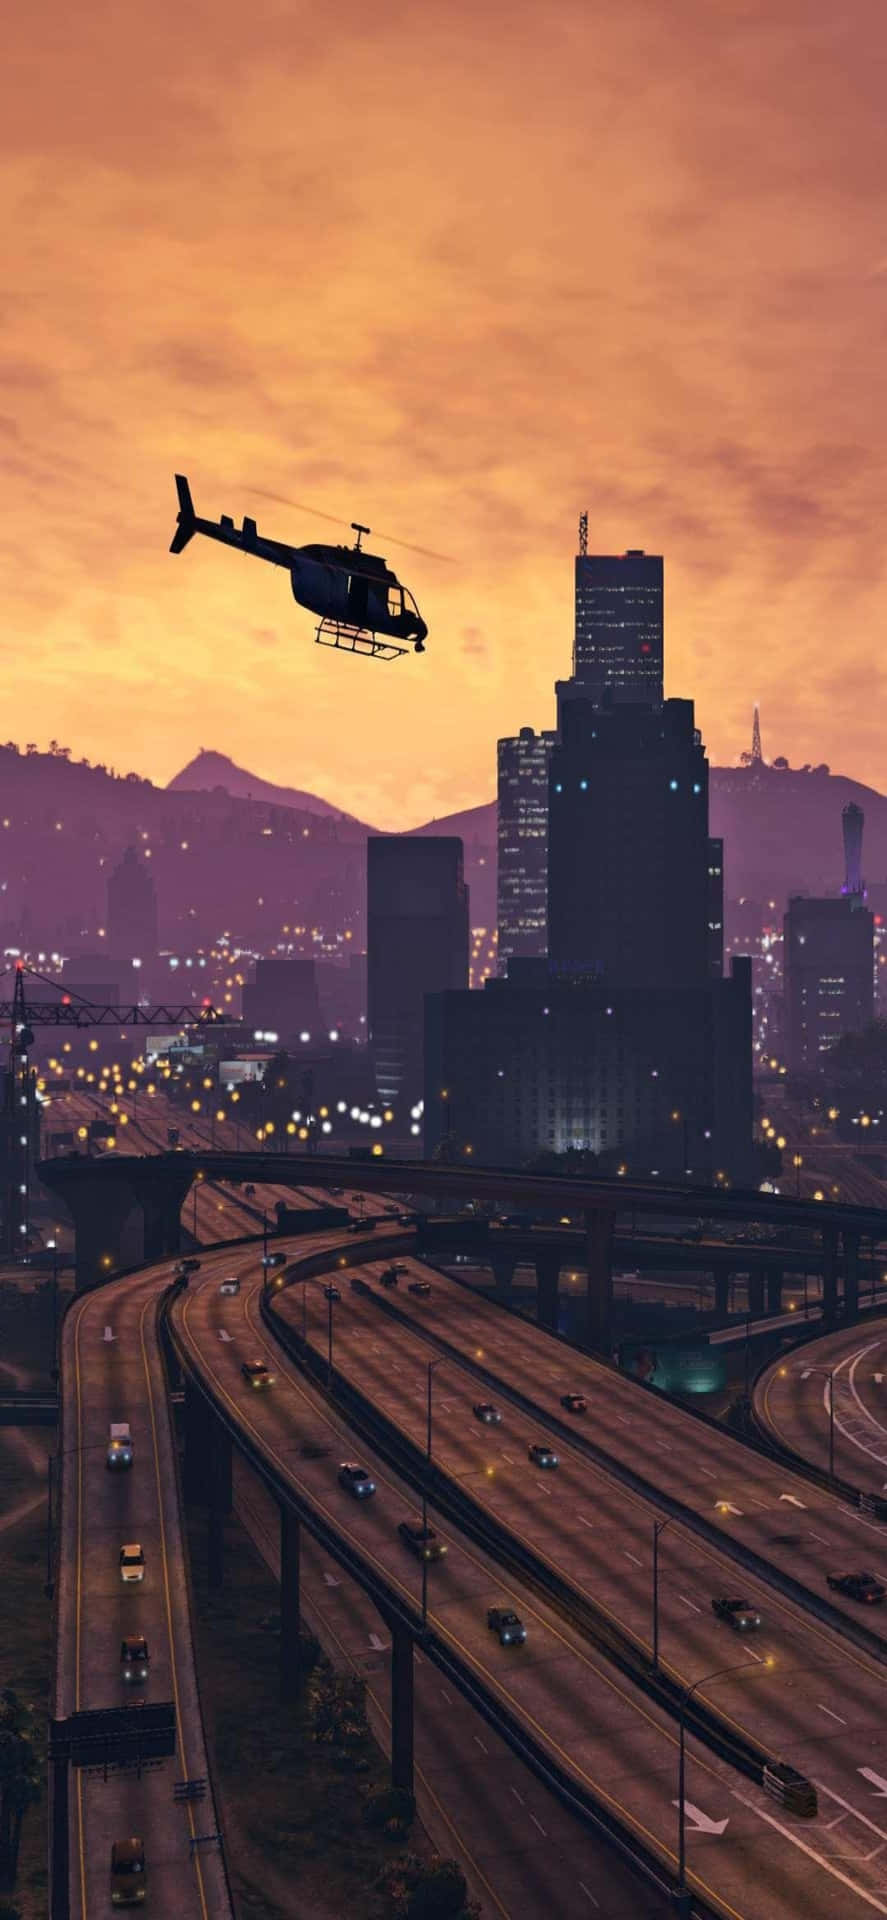 Iphone X Grand Theft Auto V Background&Helicopter